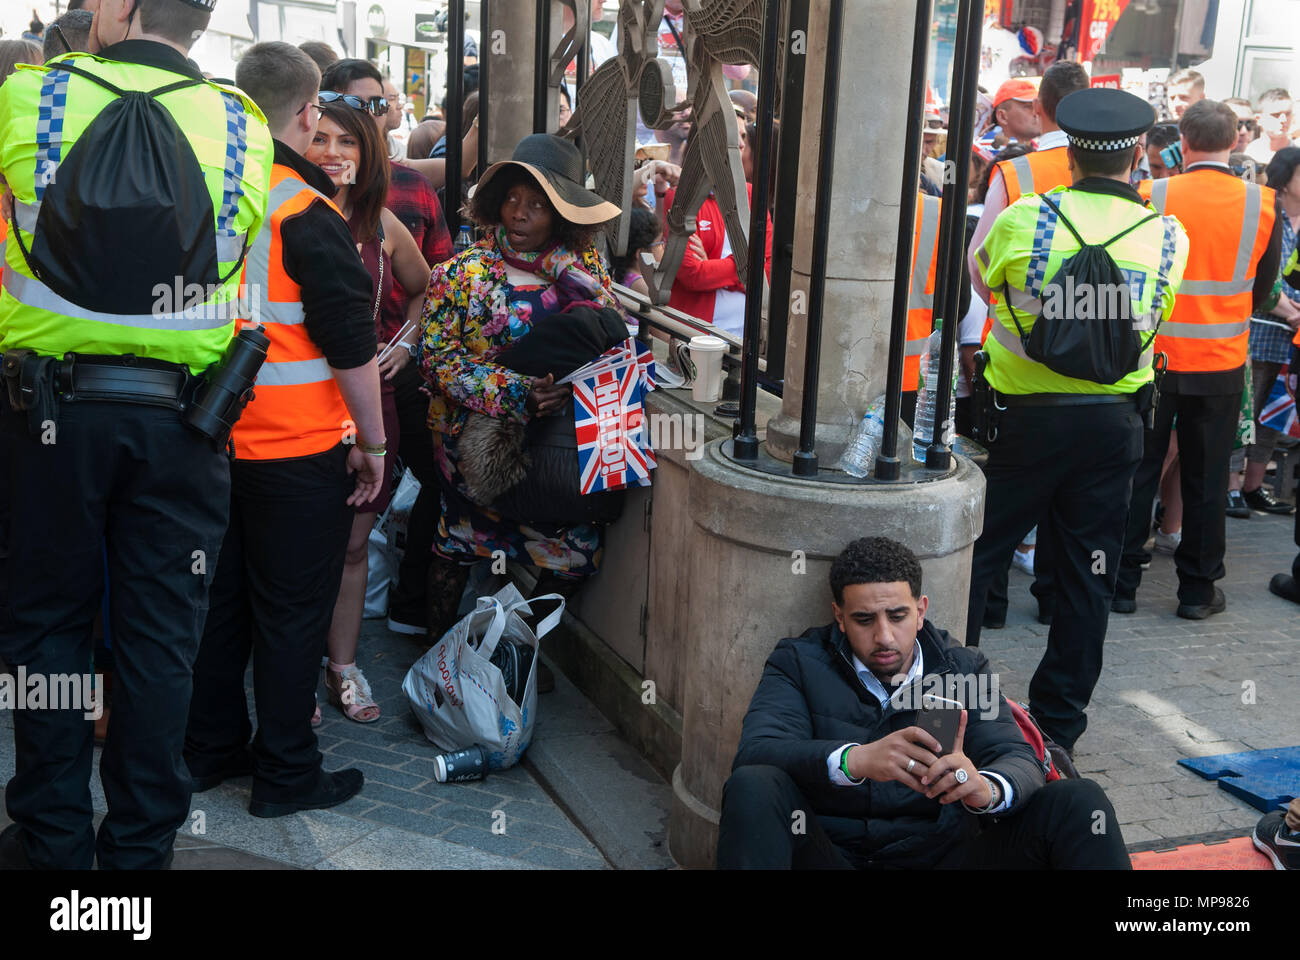 Duke and Duchess of Sussex Royal Wedding Prince Harry Meghan Markle 19th May  2018 People in crowd cant get to centre of Windsor, security barrier too many people.2018  HOMER SYKES Stock Photo